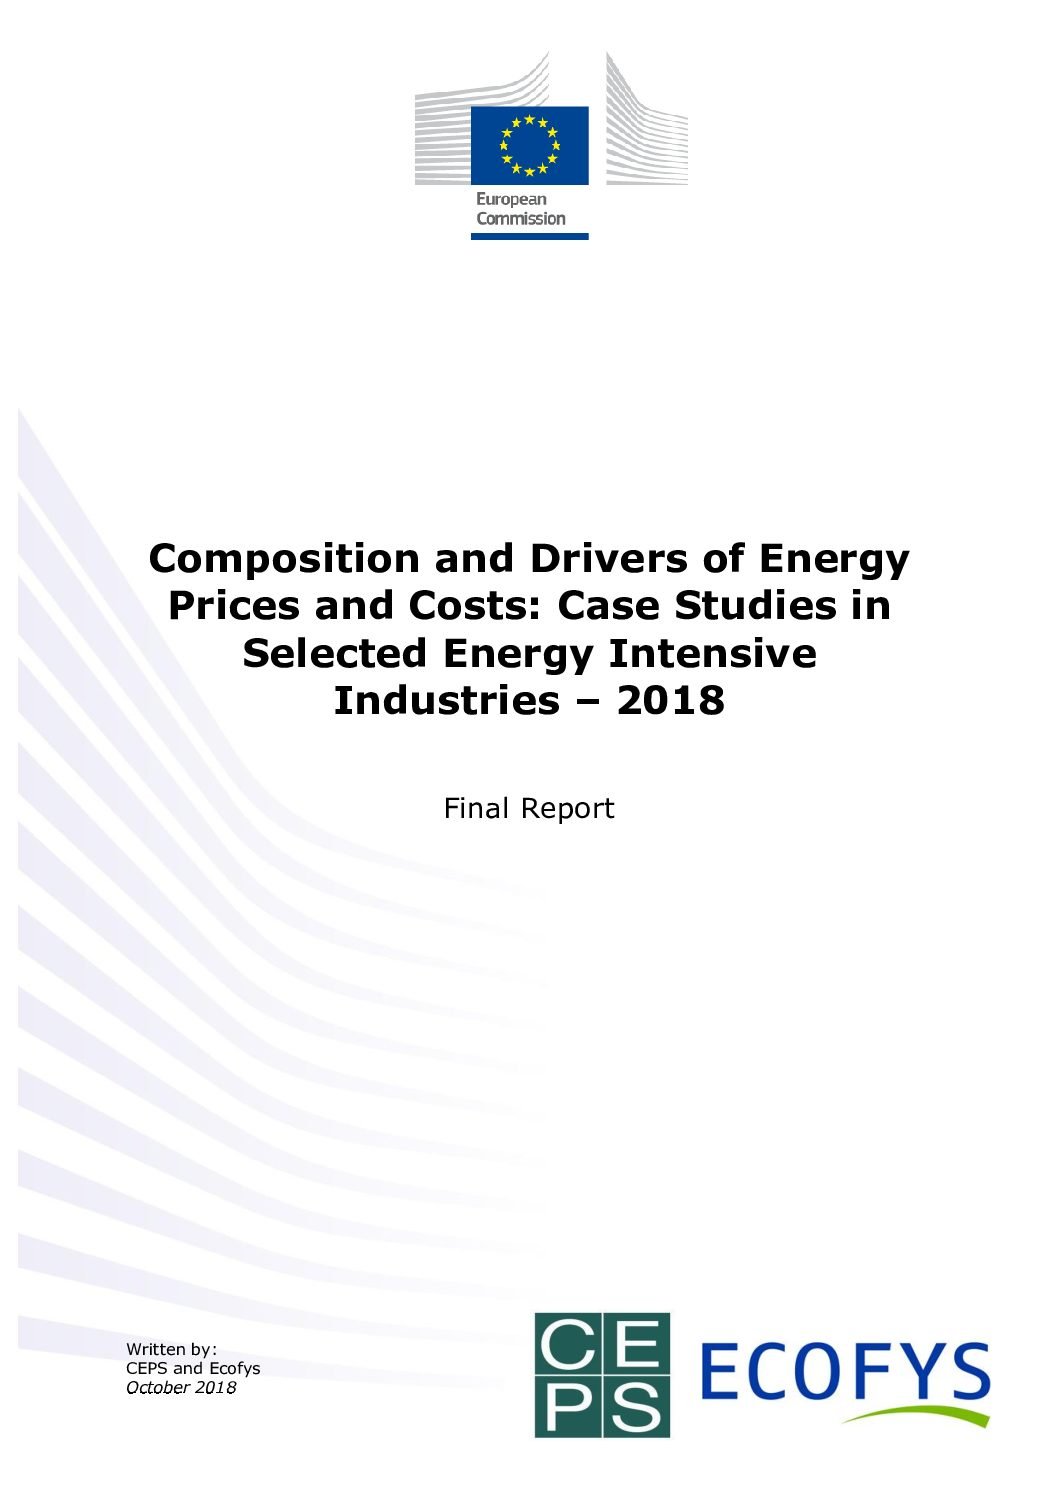 Composition and Drivers of Energy Prices and Costs: Case Studies in Selected Energy Intensive Industries – 2018 Cover Image